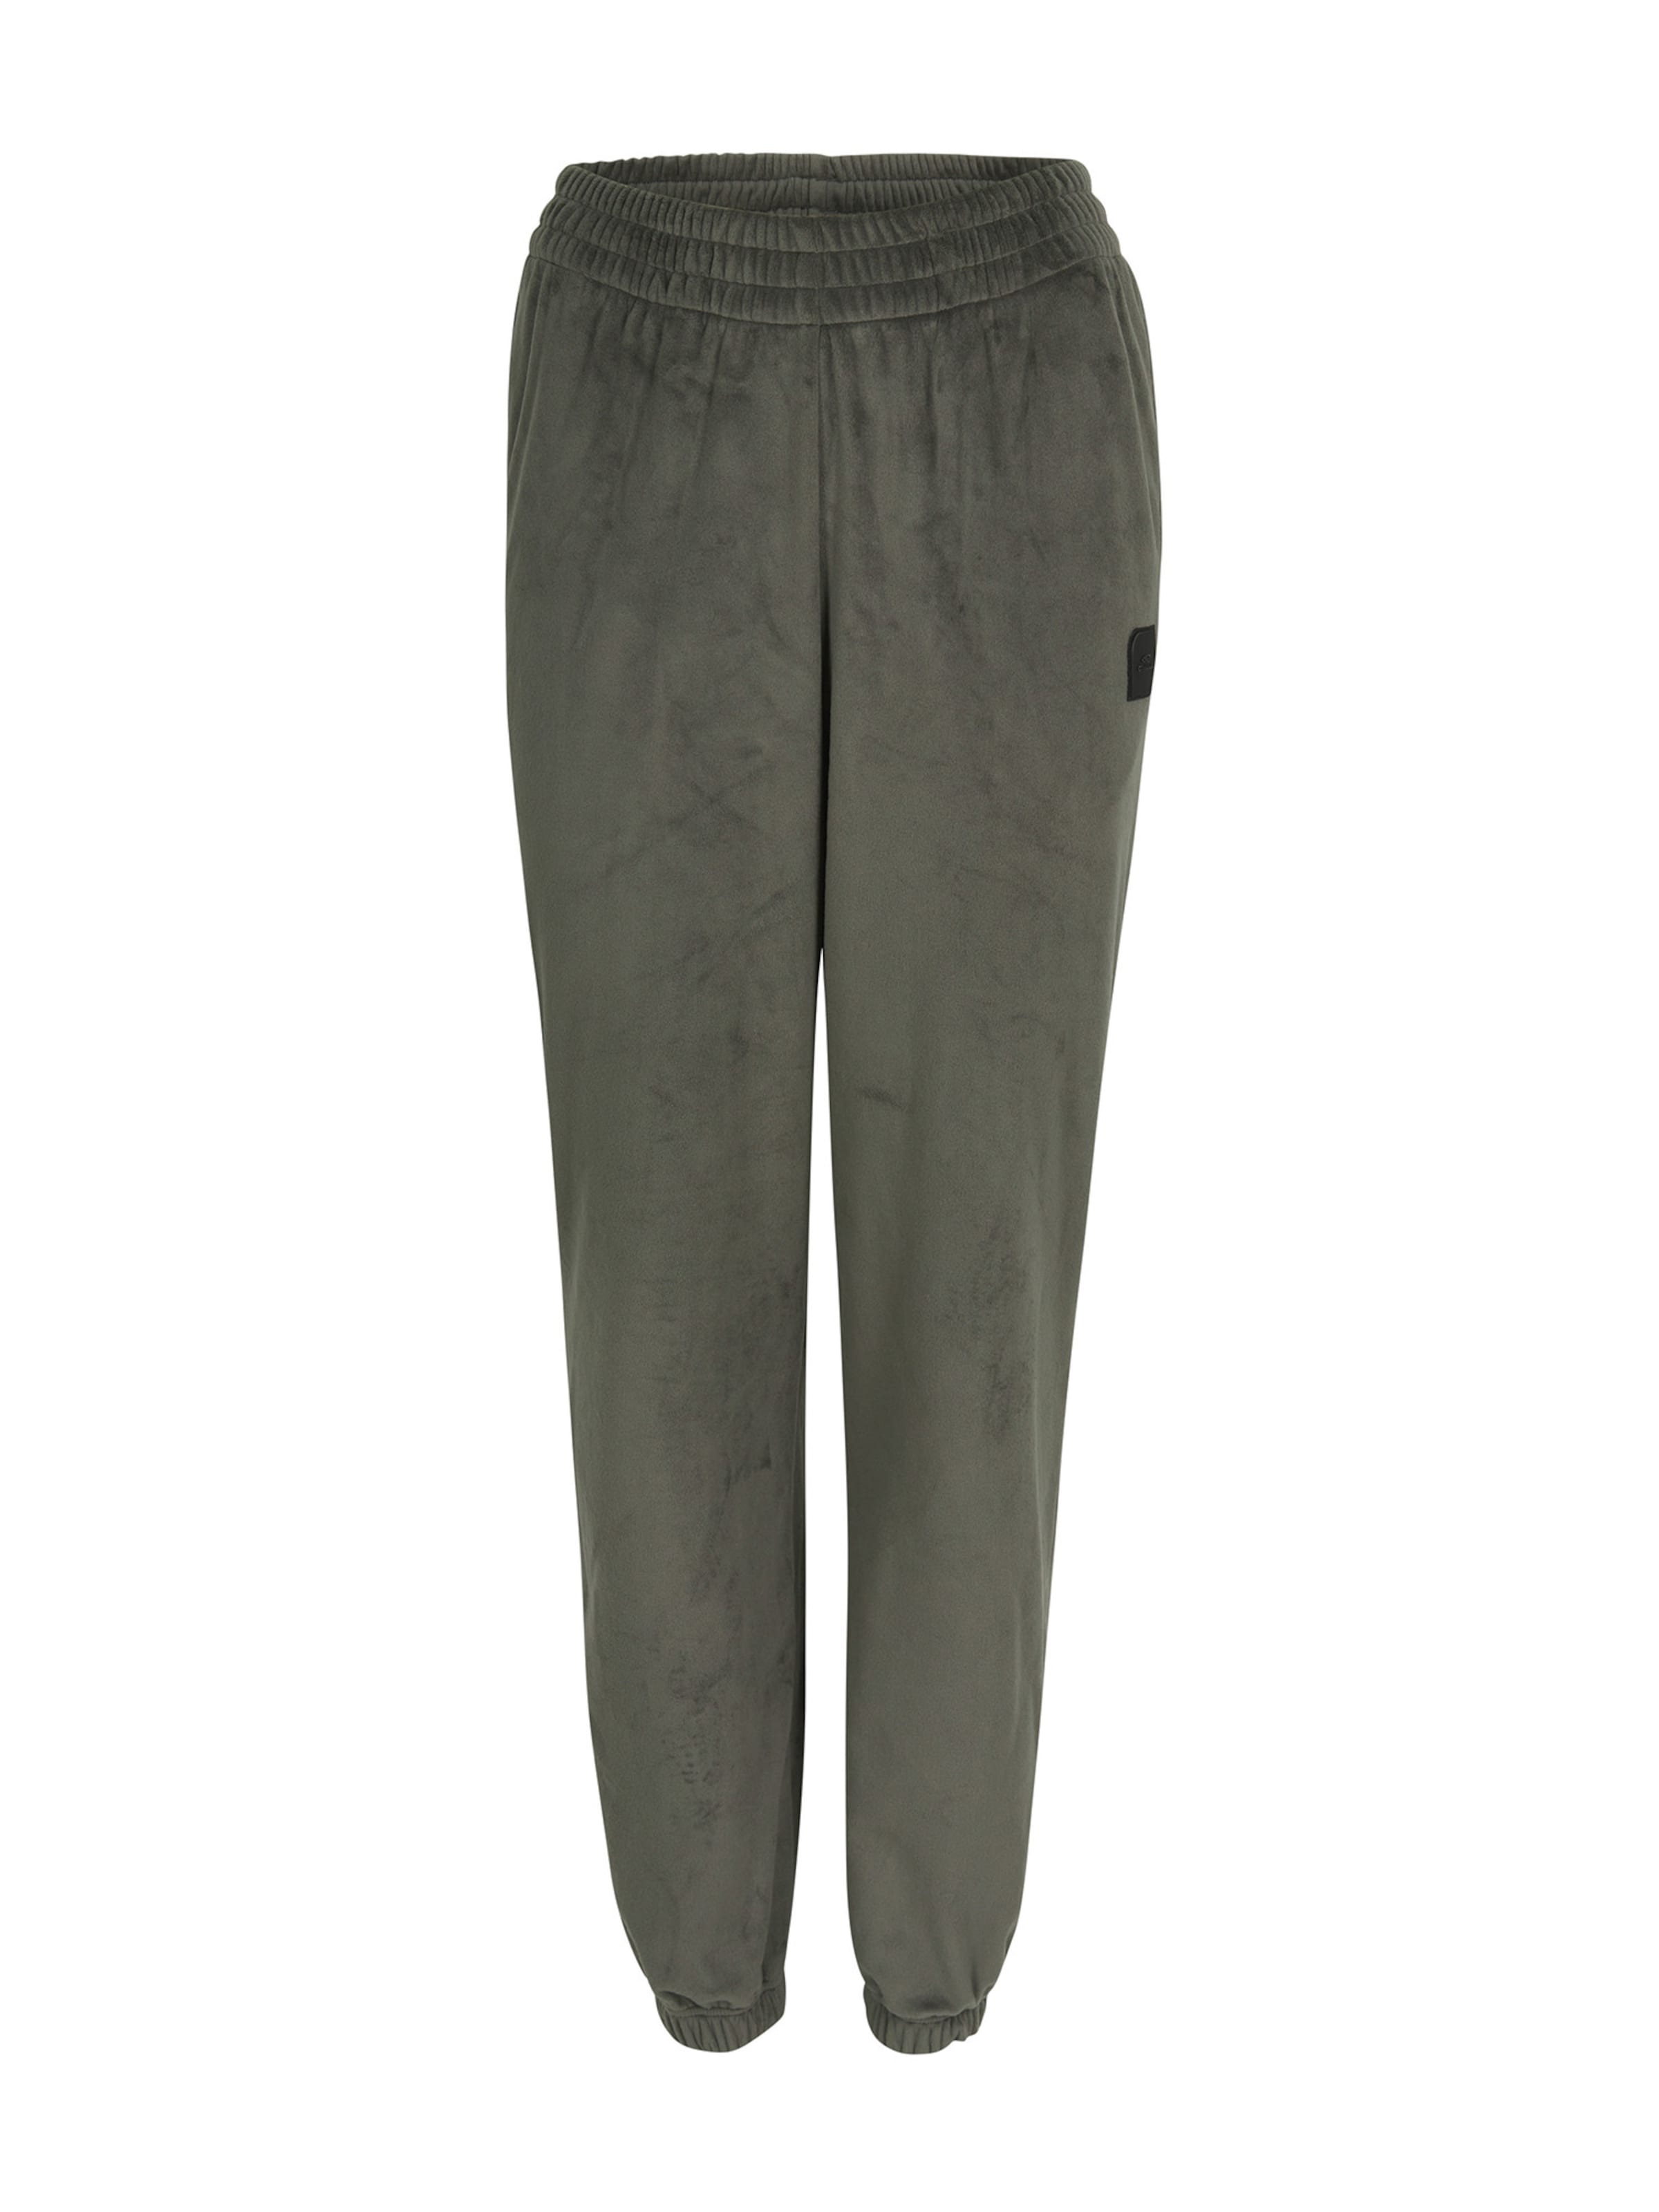 VjHJs Donna ONEILL Pantaloni in Cachi 